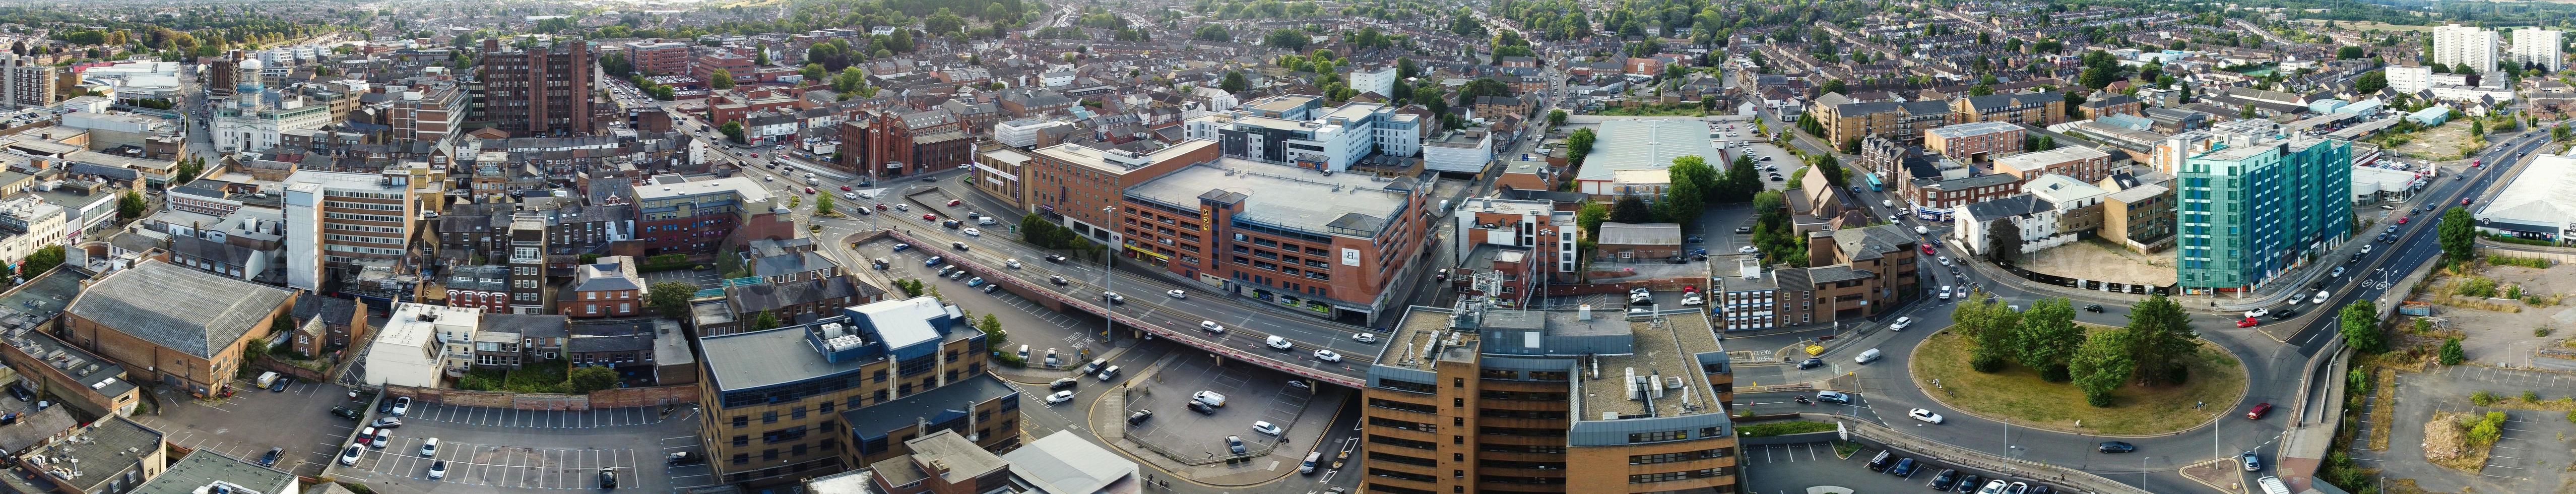 Luton City Centre and Local Buildings, High Angle Drone's View of Luton City Centre and Railway Station. Luton England Great Britain photo